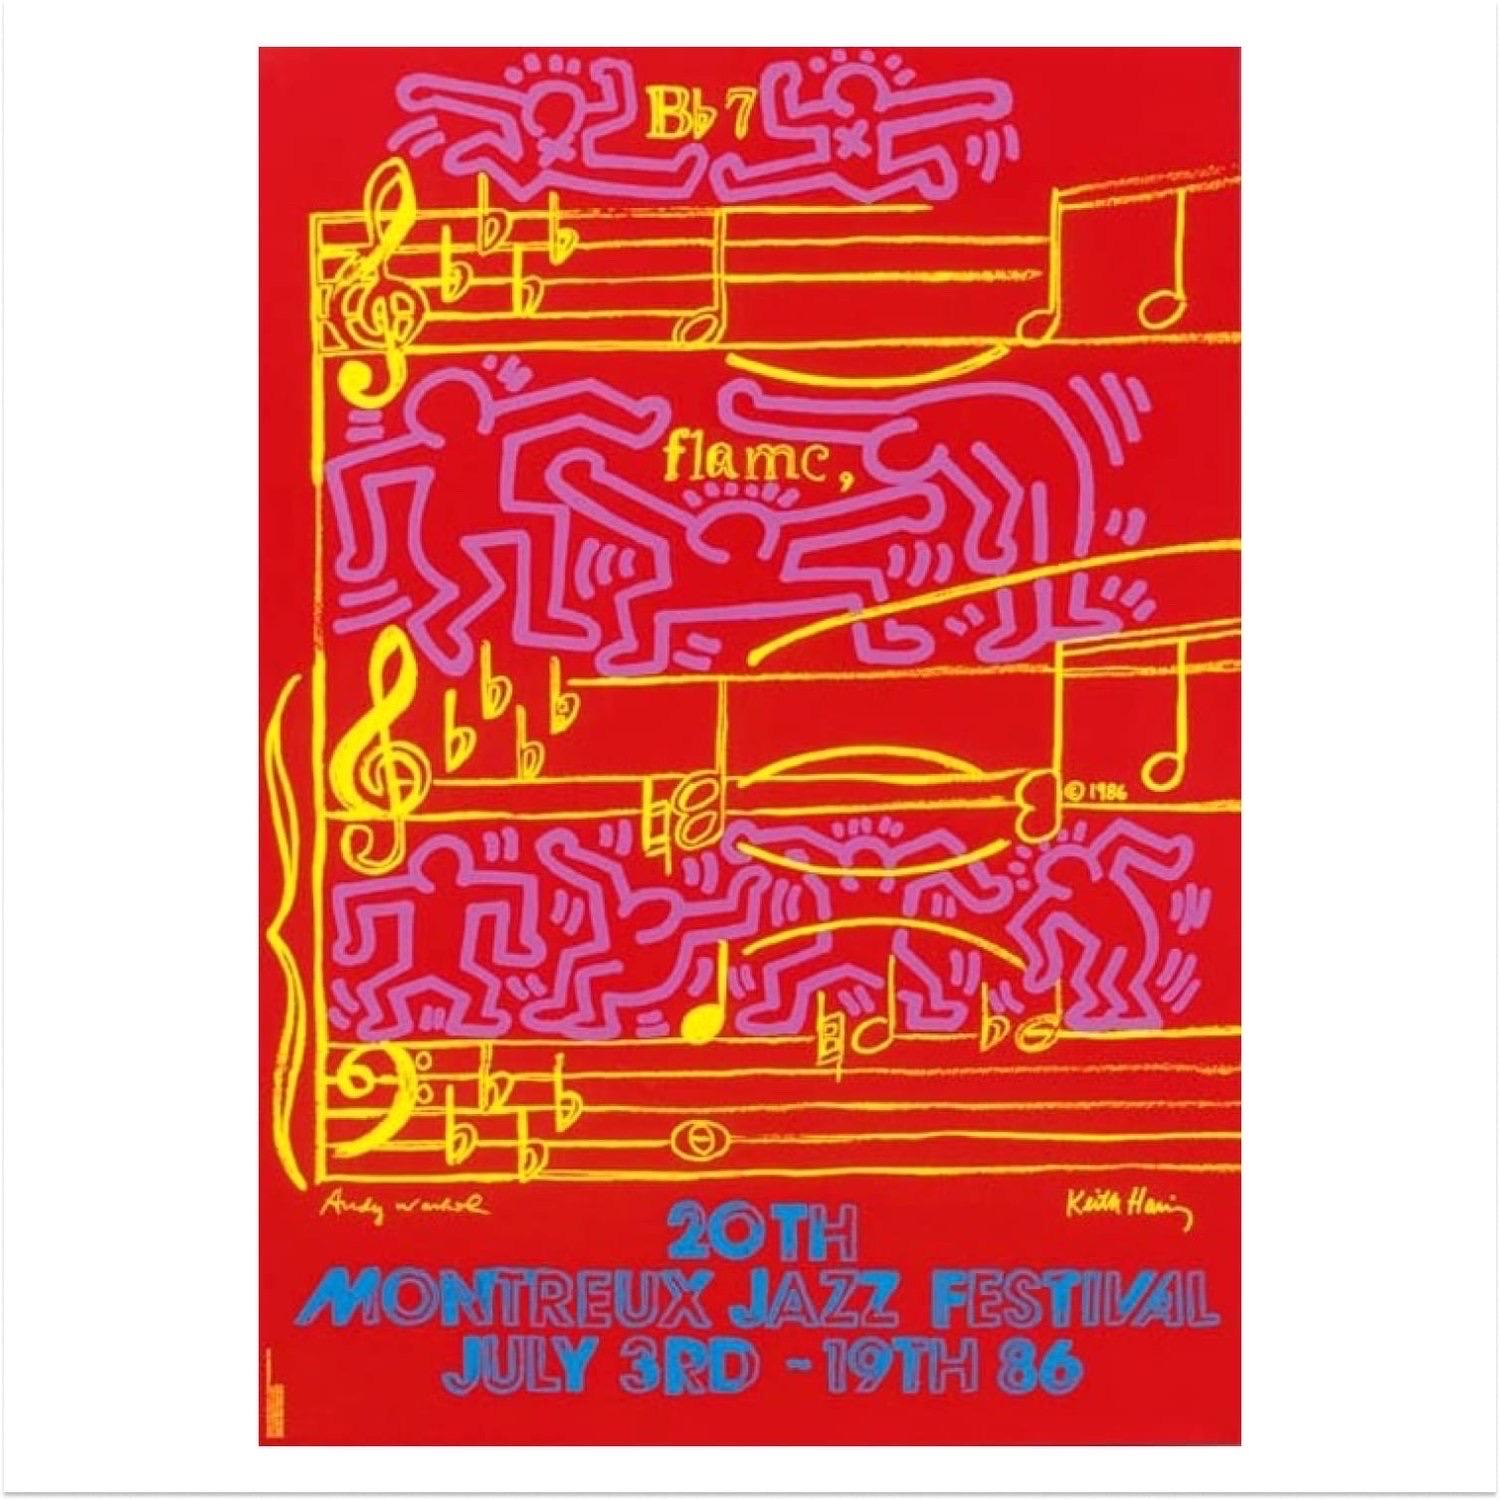 Keith Haring & Andy Warhol, Montreux Jazz Festival 1986

Screenprint in colours on half-matte coated 250 gr paper

Printed by Albin Uldry

Plate signed by Keith Hairng & Andy Warhol 

70 x 100 cm (27.6 x 39.4 in) 

Celebrating twenty years of the